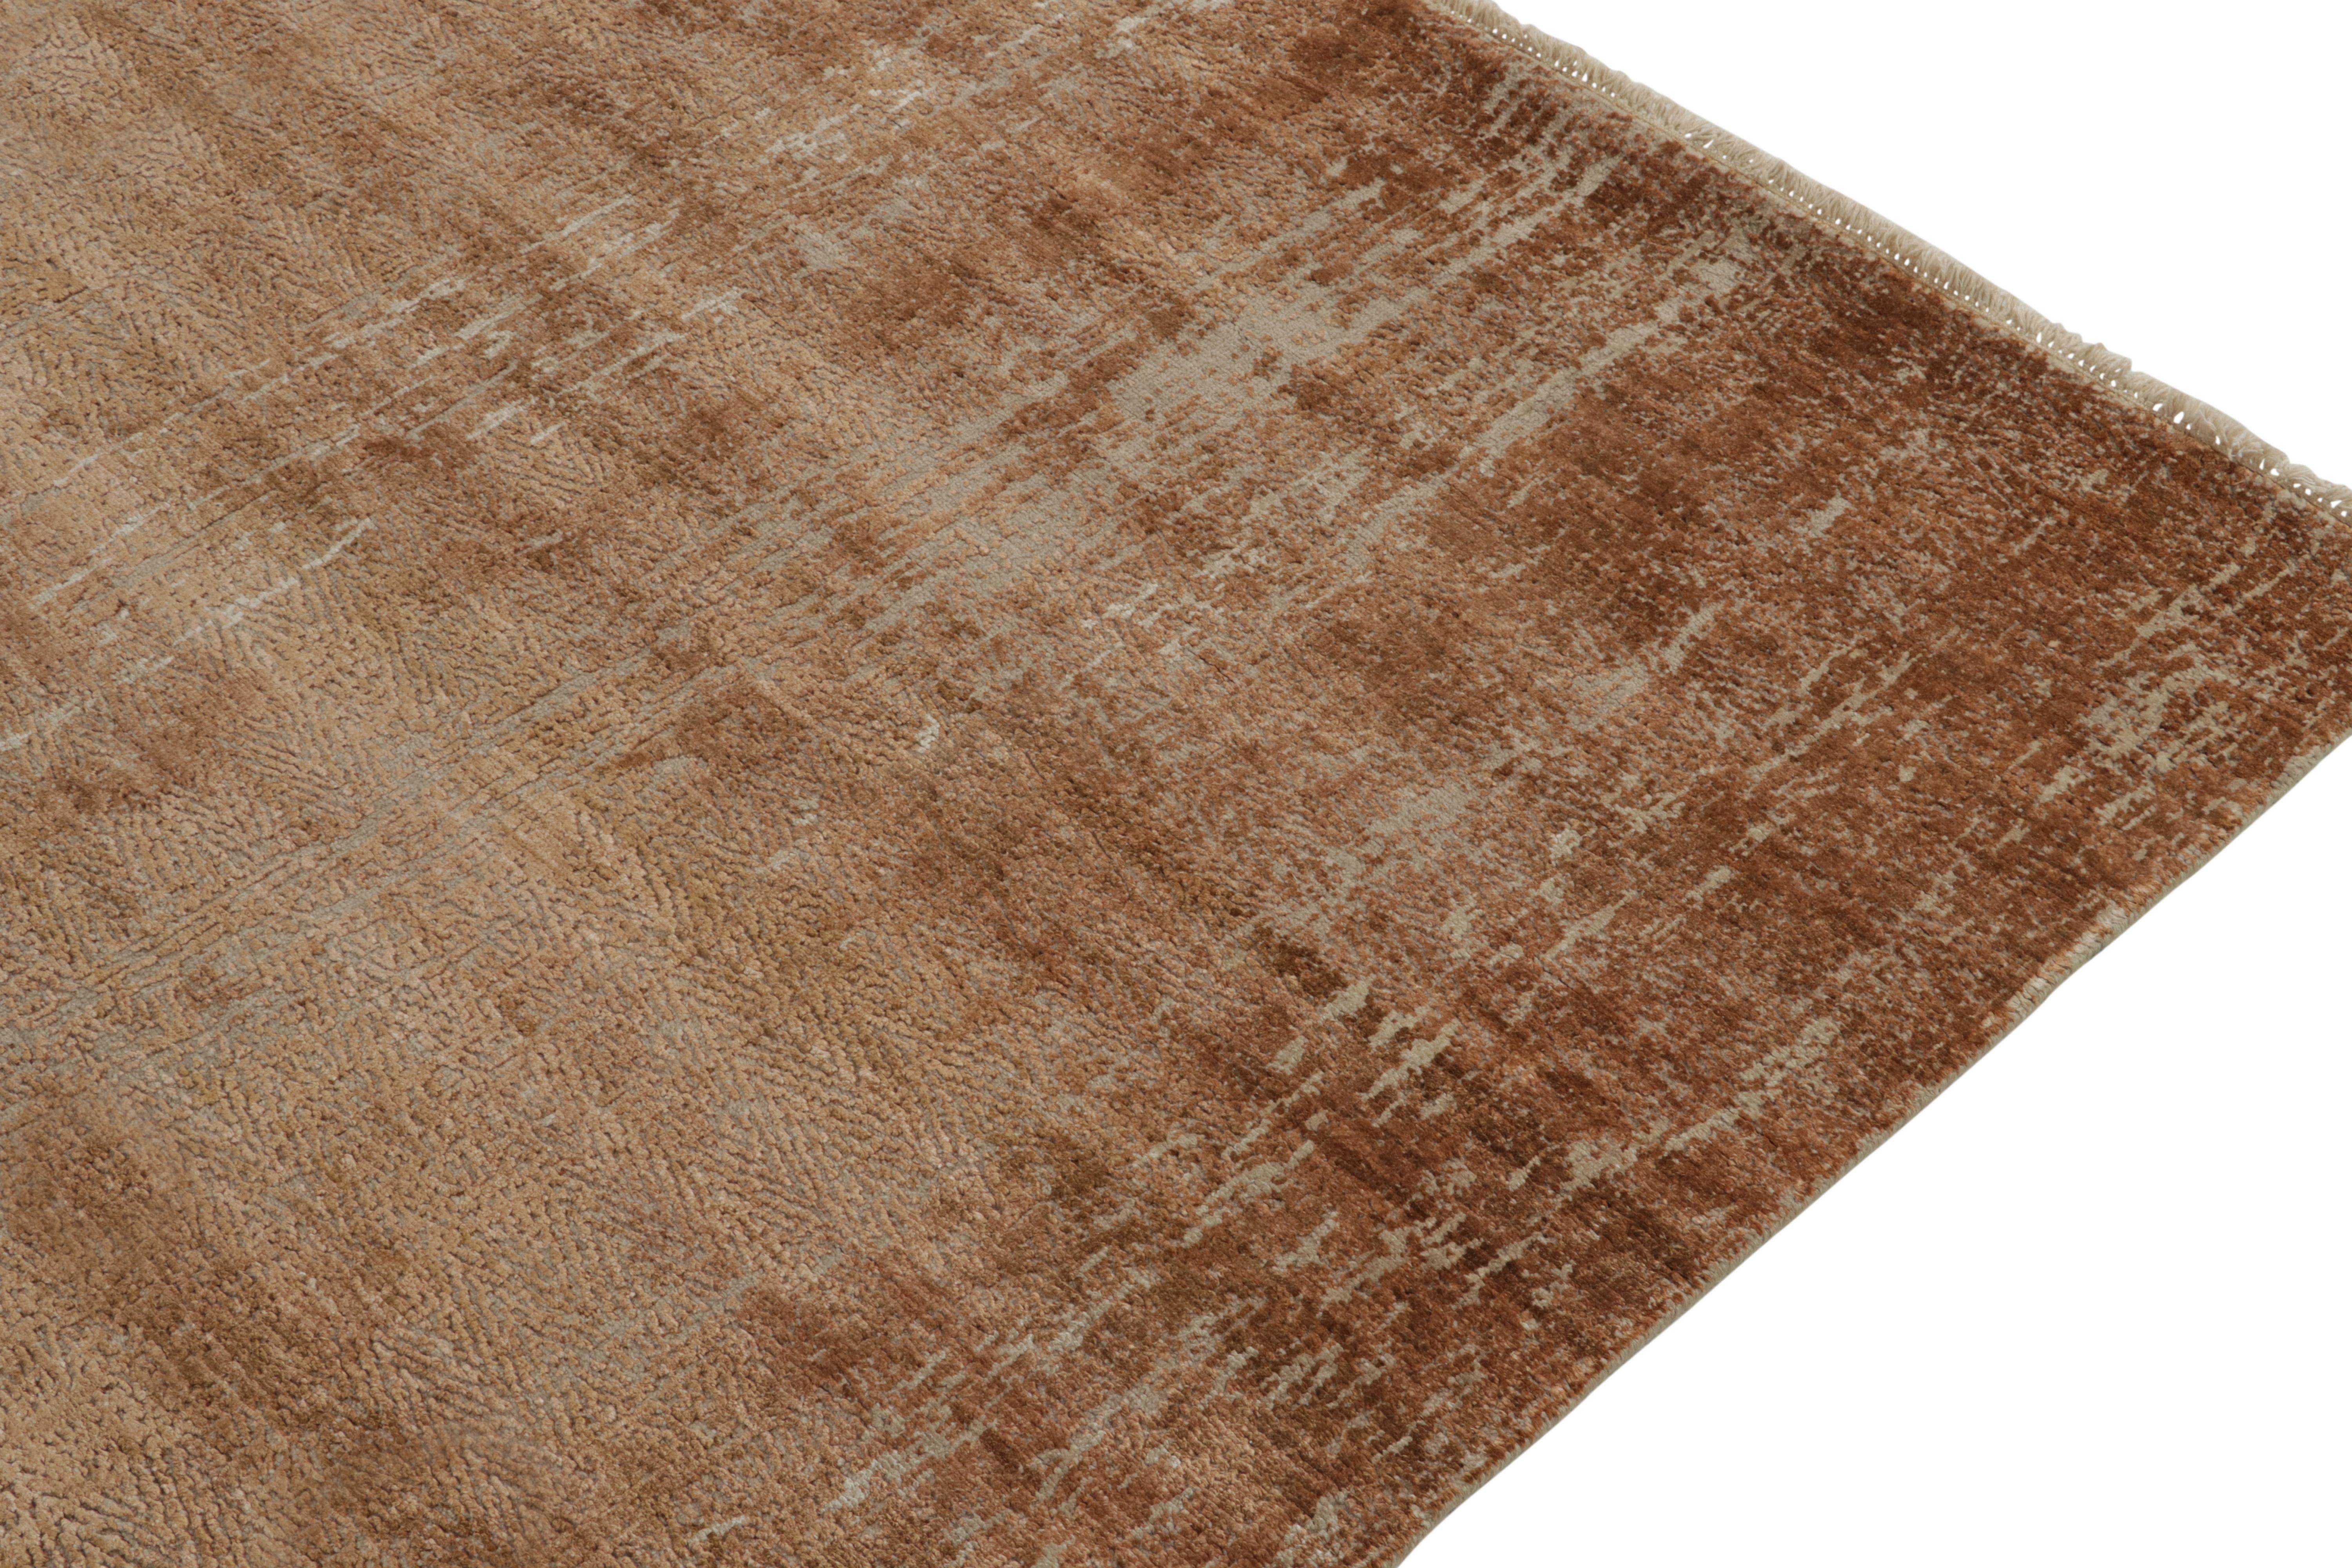 Rug & Kilim’s Modern Abstract Rug in Beige-Brown and Gray In New Condition For Sale In Long Island City, NY